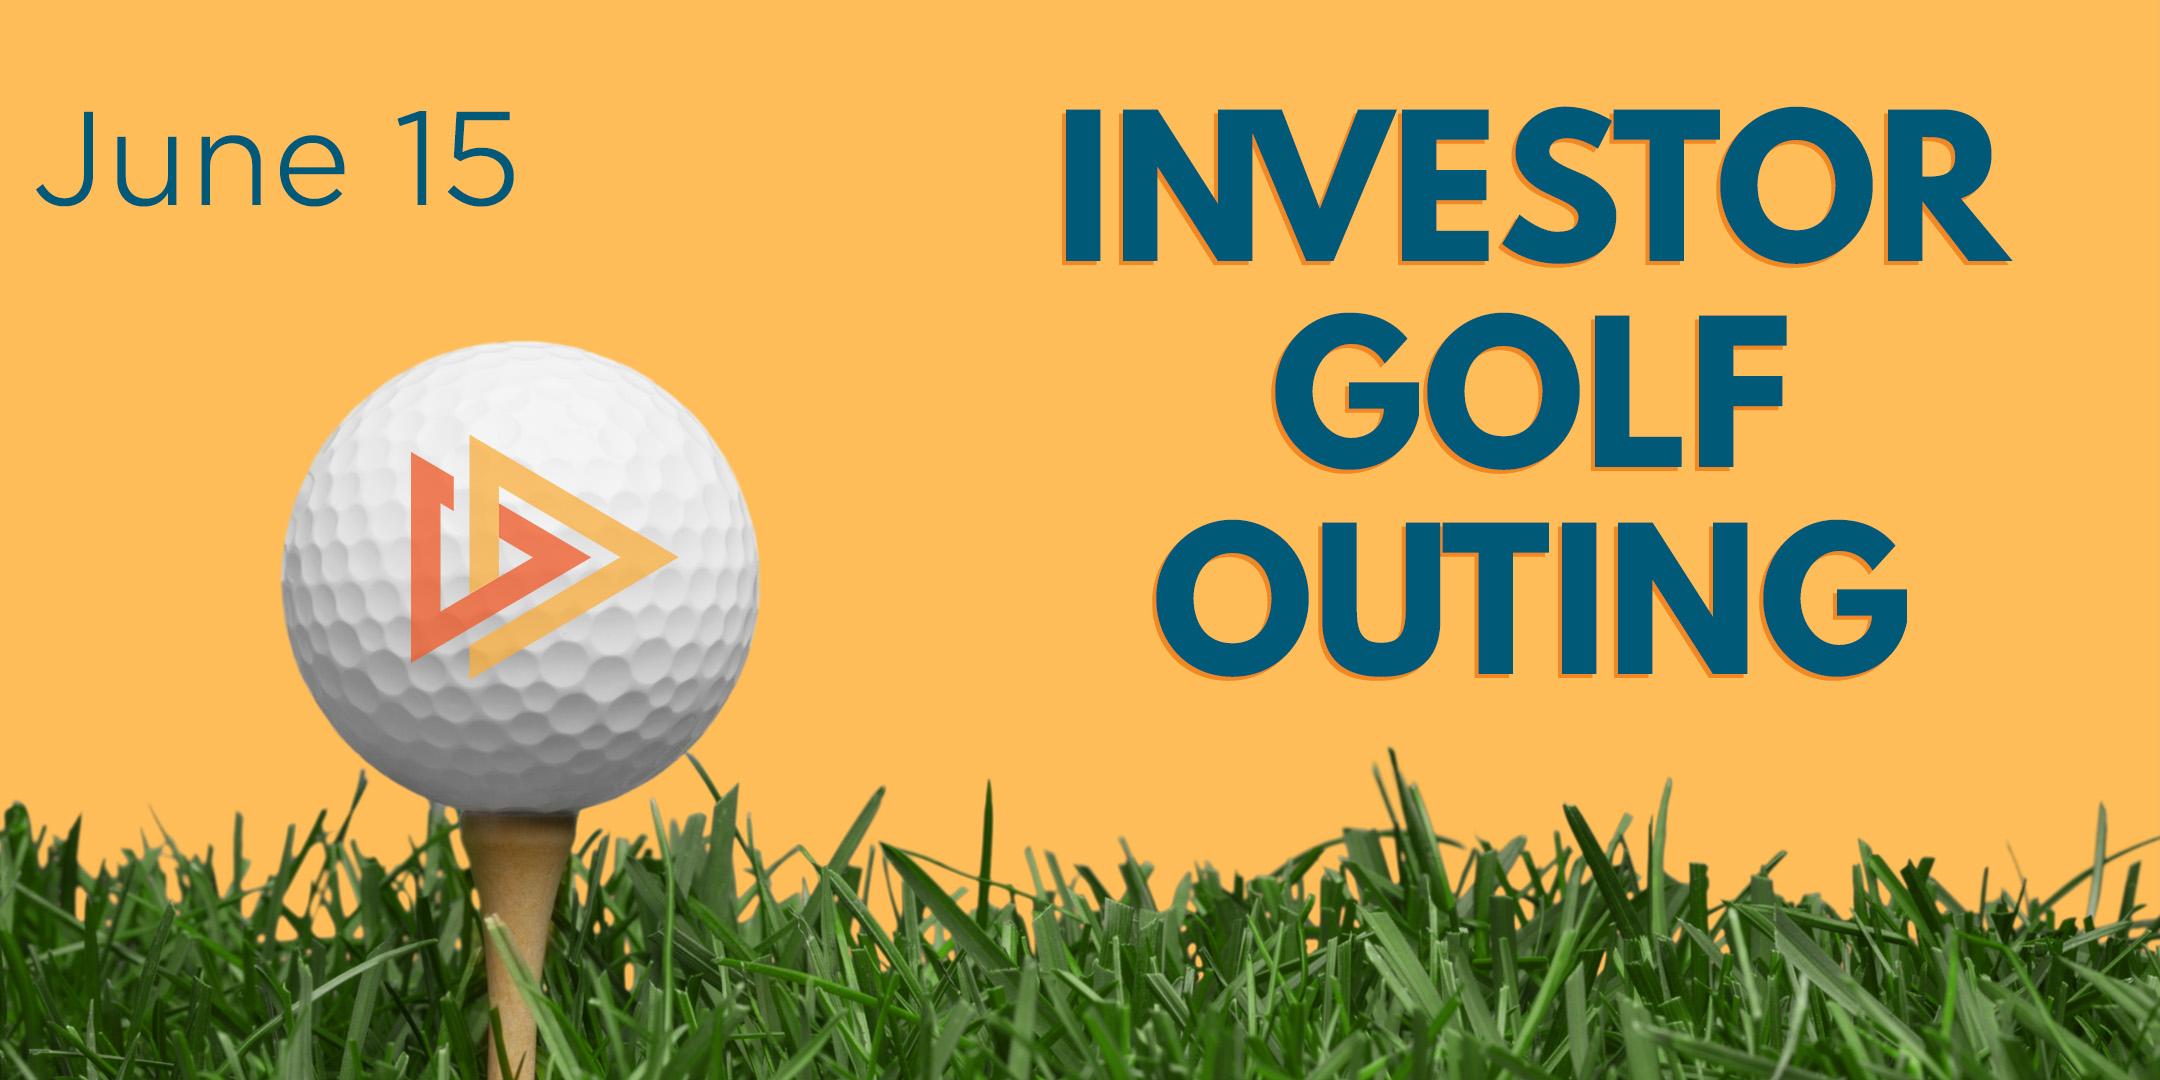 PACT Investor Golf Outing